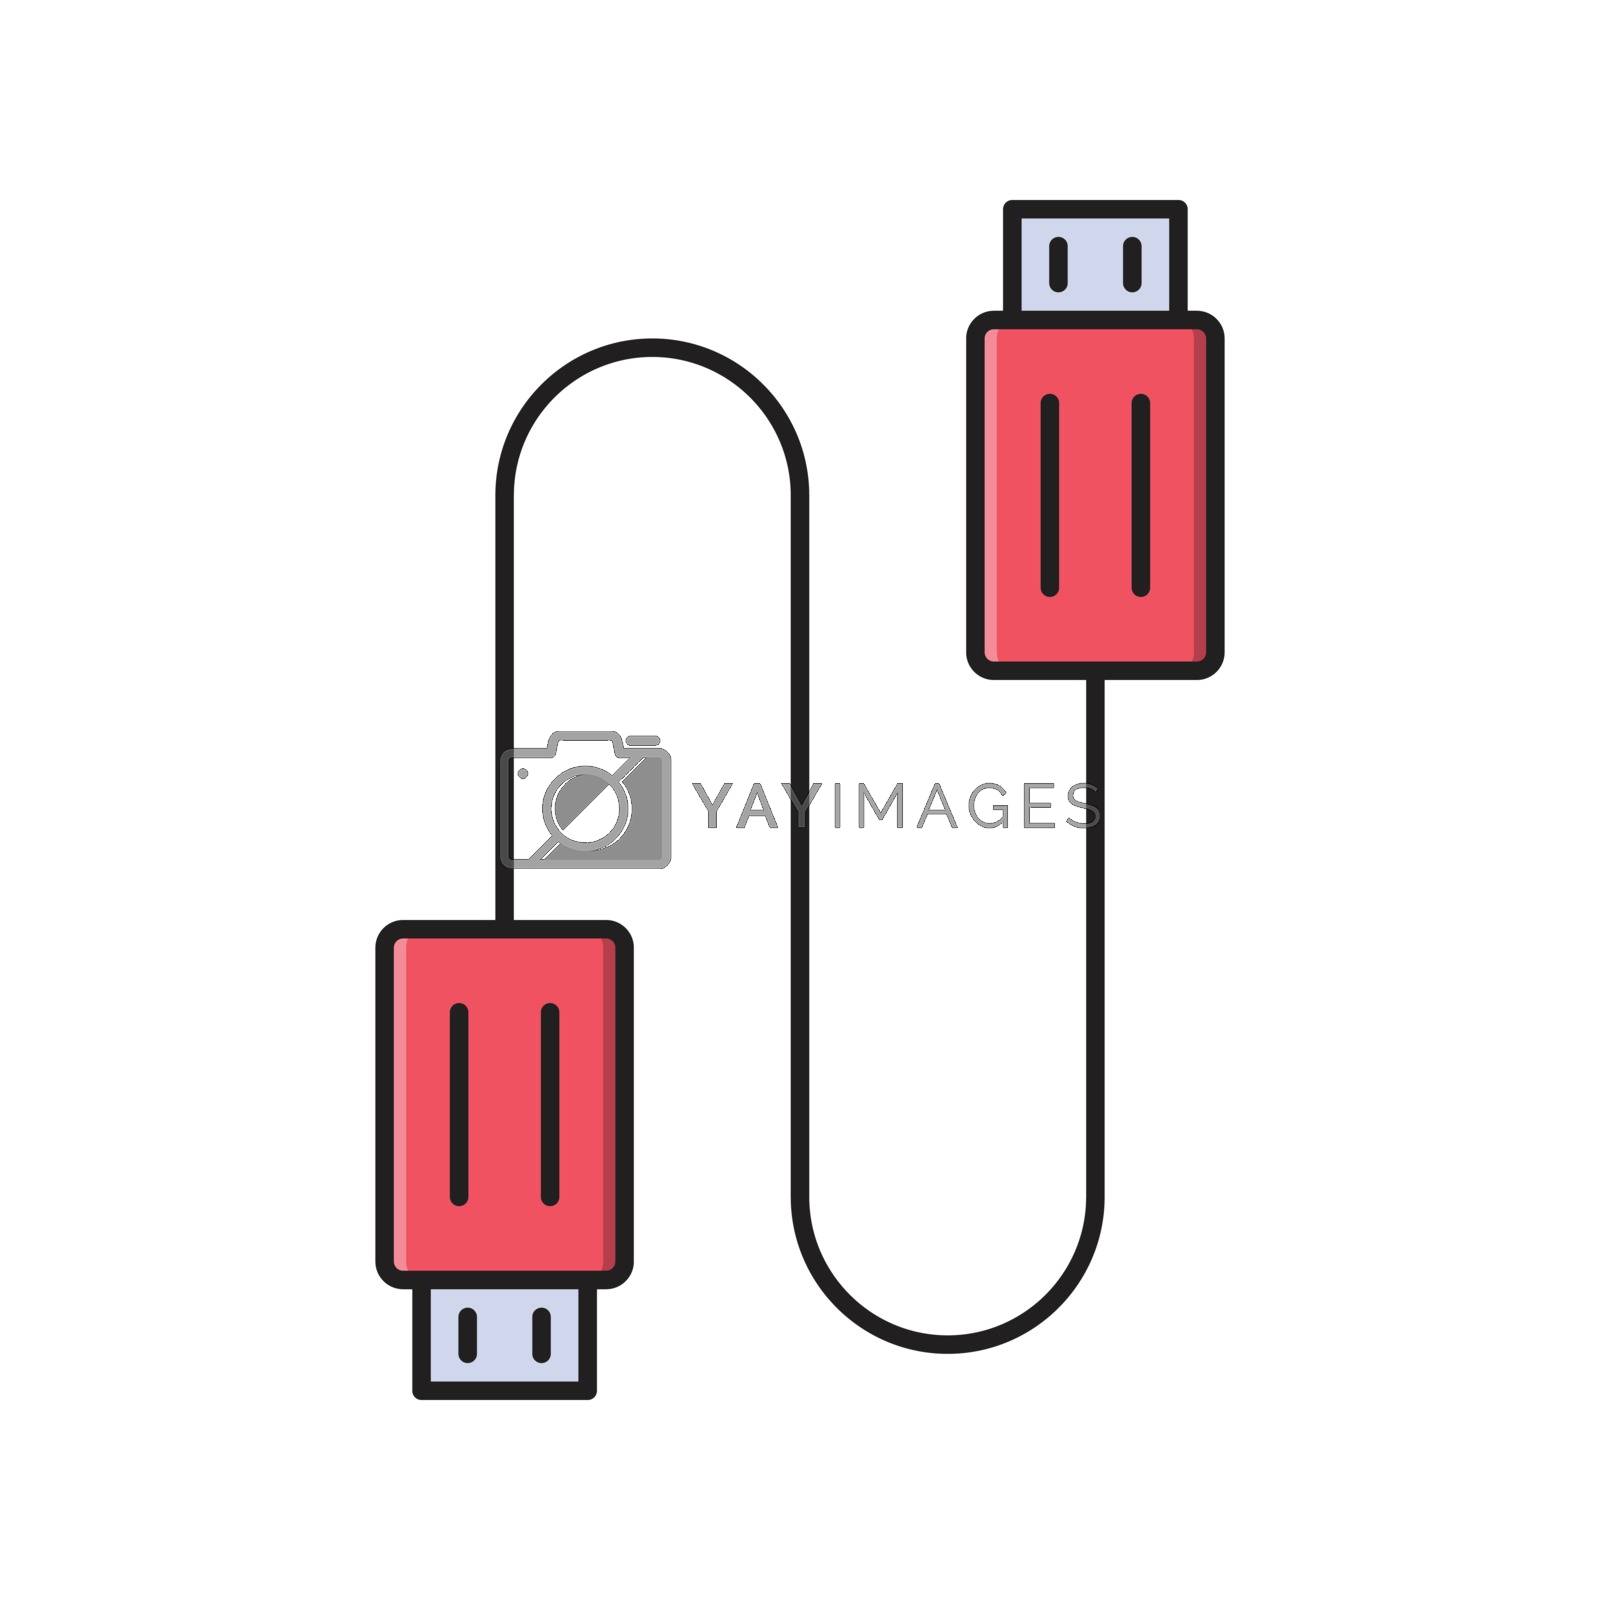 Royalty free image of cable by vectorstall